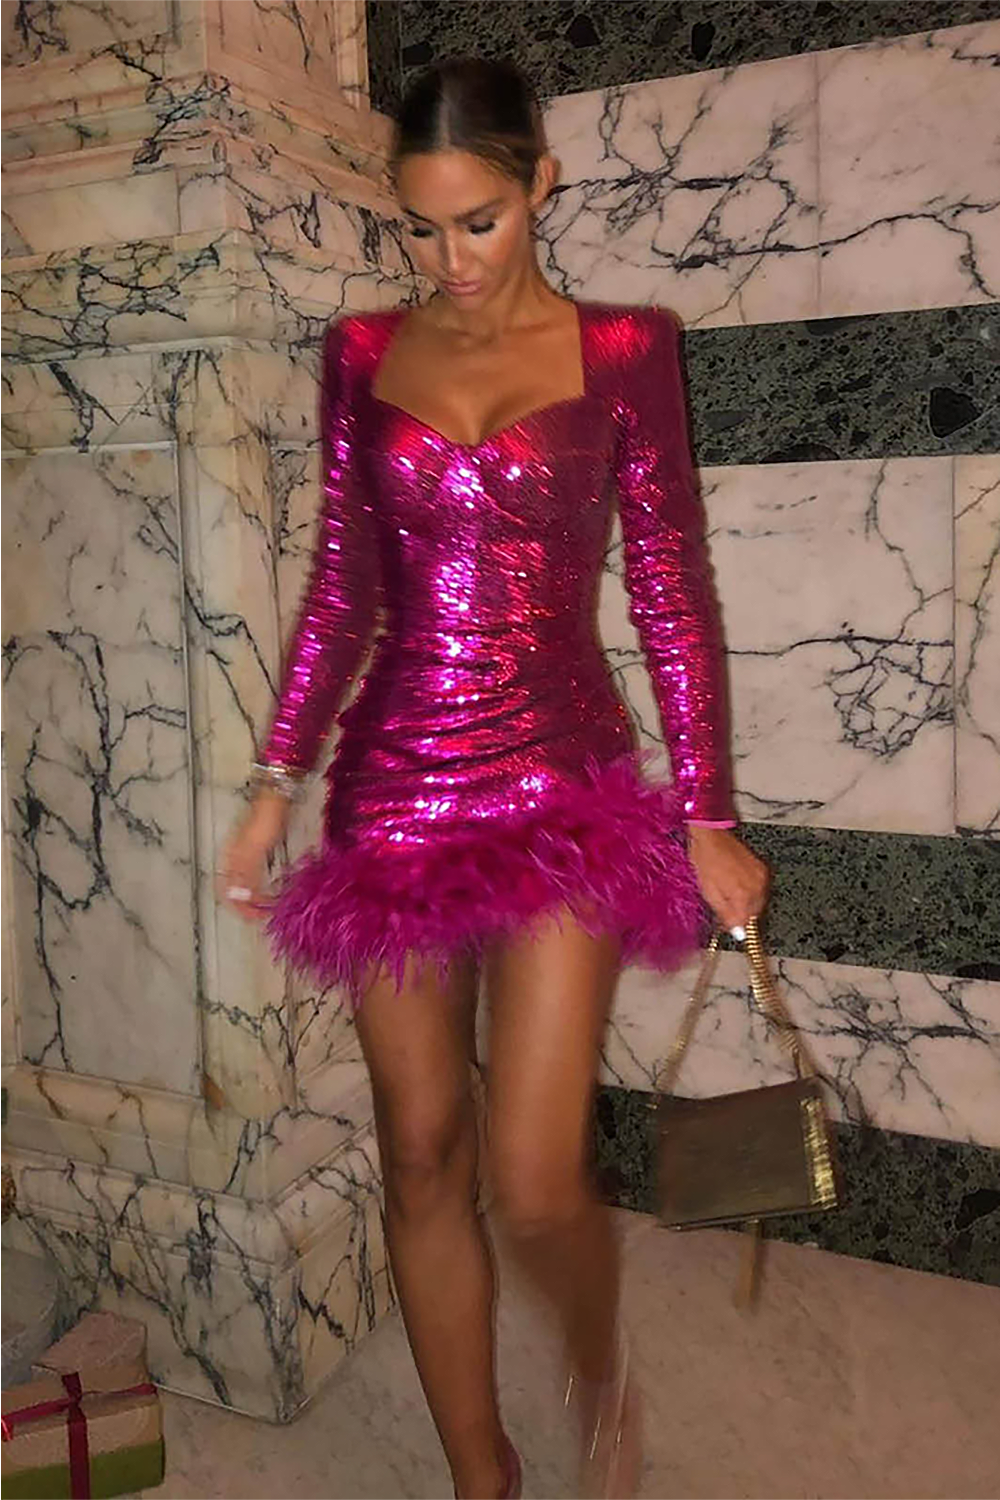 Sequins Feather-trim Long sleeves Mini Dress In Pink Rose Gold